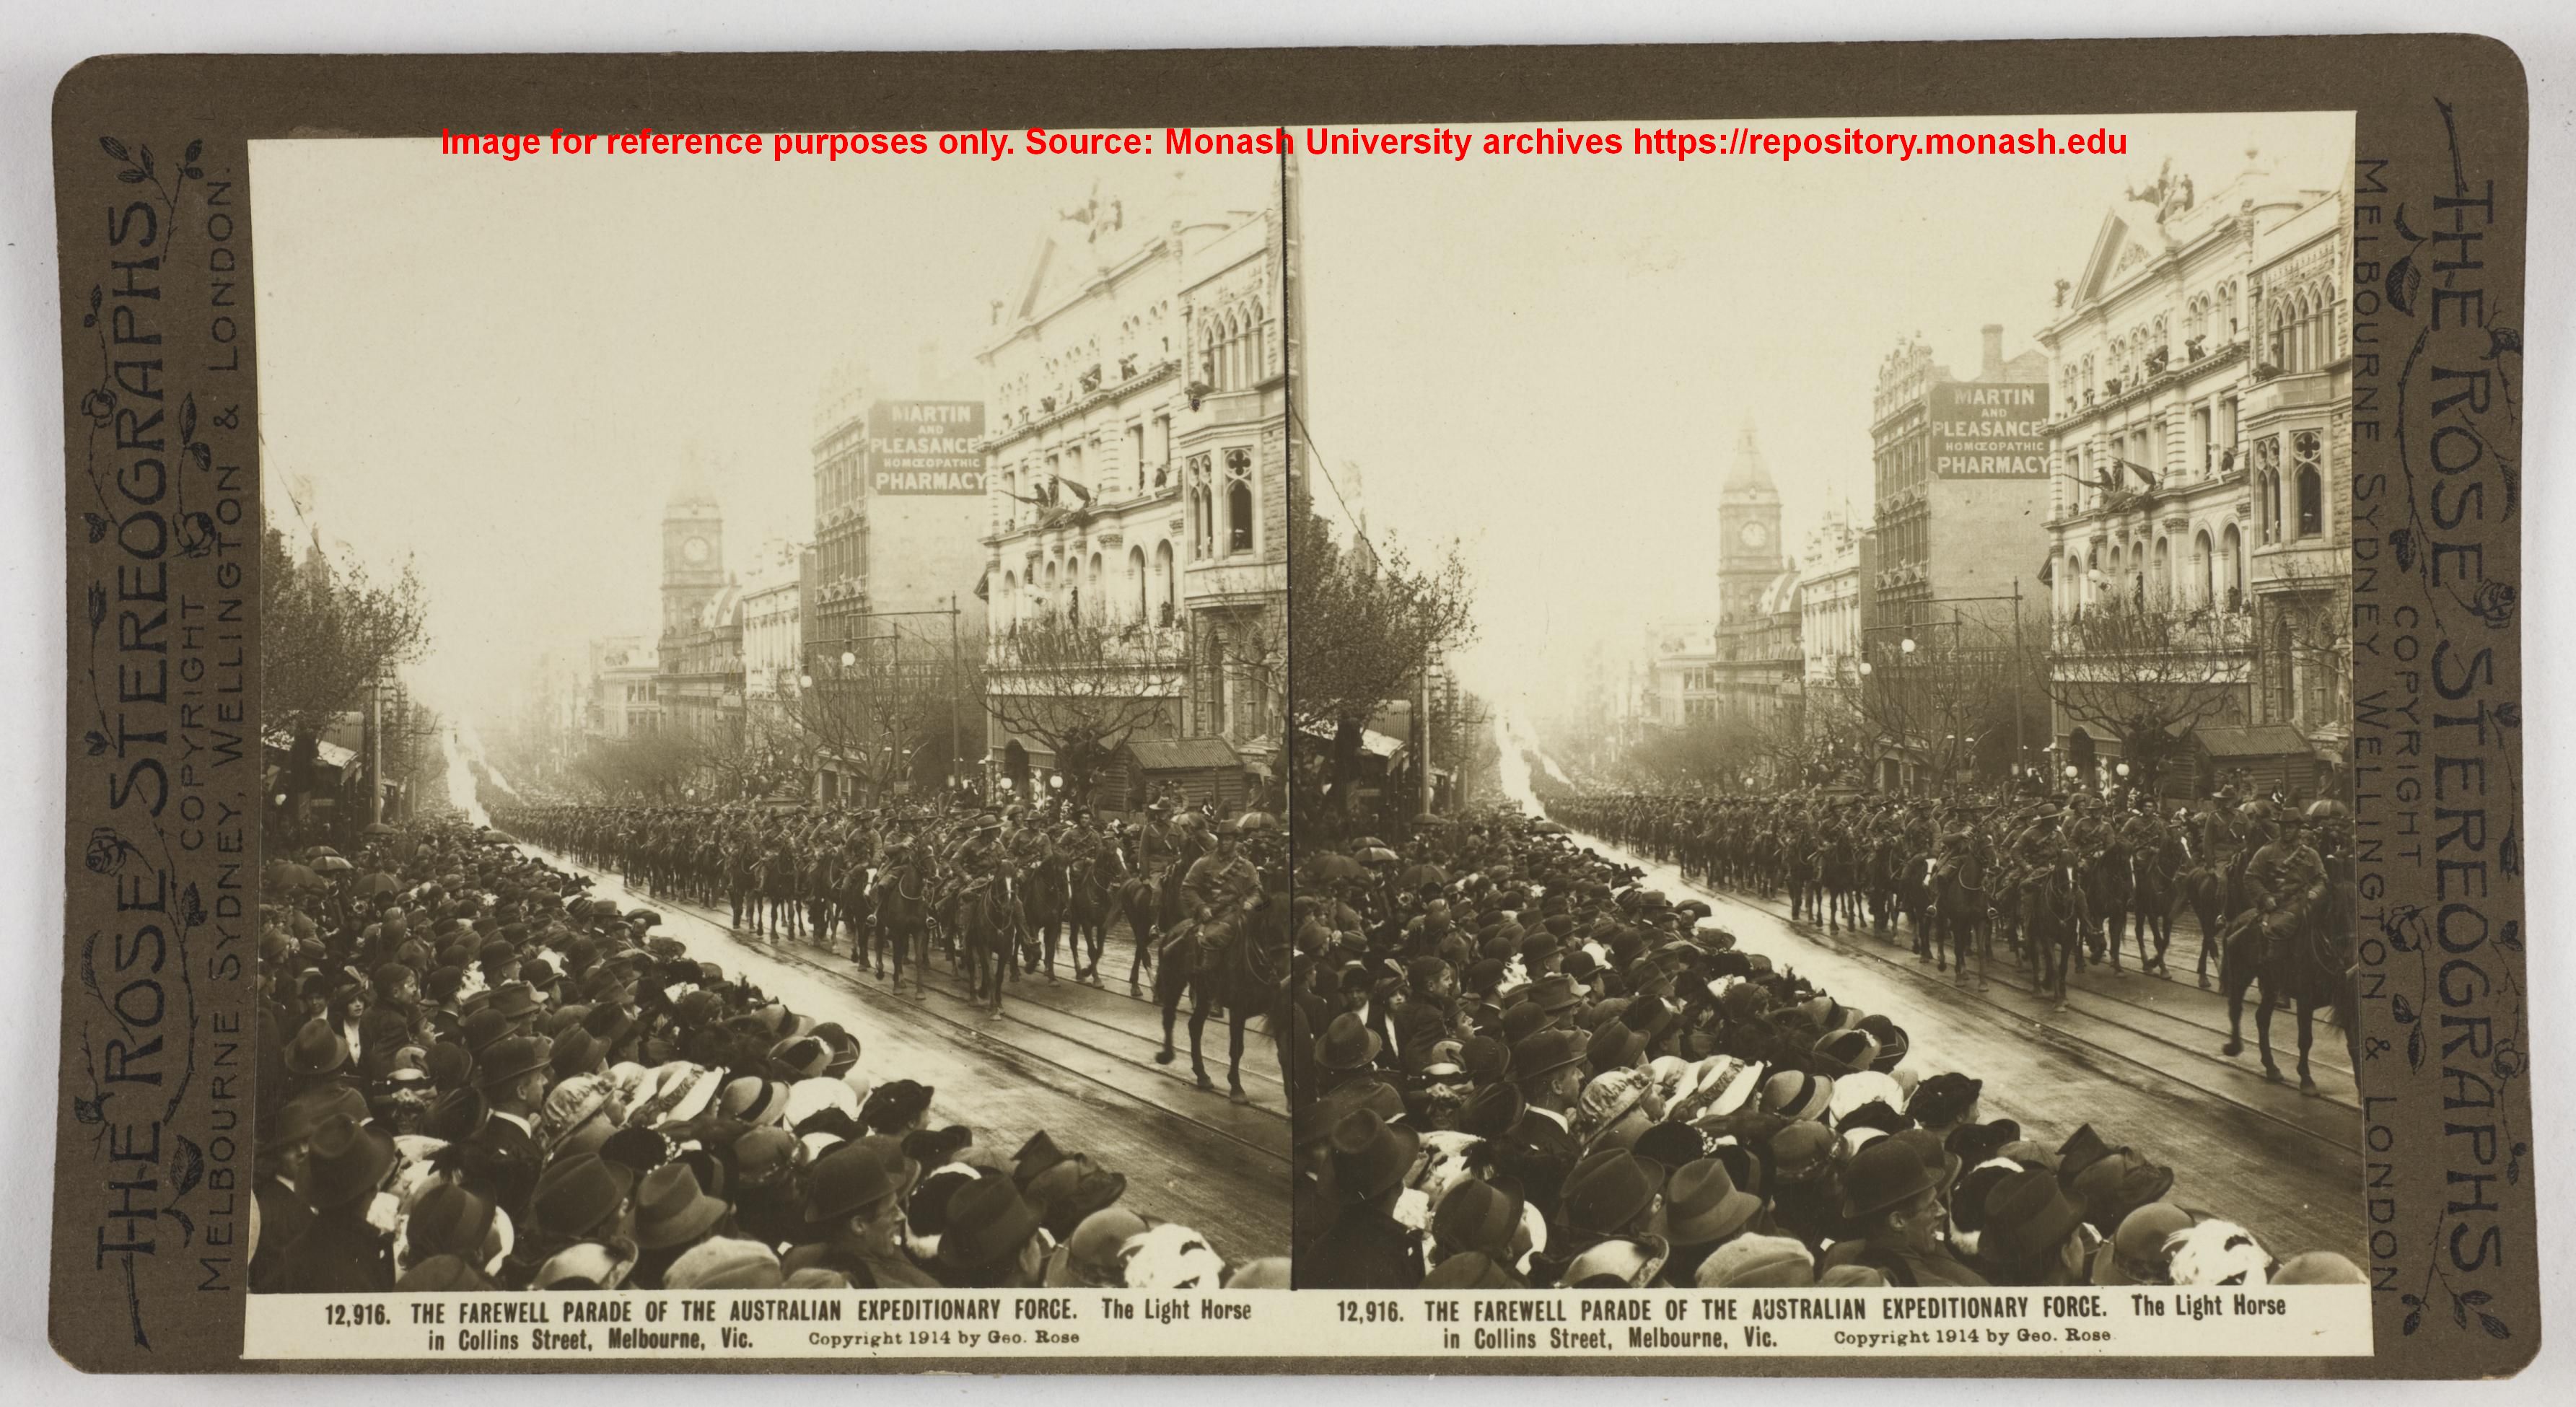 THE FAREWELL PARADE OF THE AUSTRALIAN EXPEDITIONARY FORCE. The Light Horse in Collins Street, Melbourne, Vic.